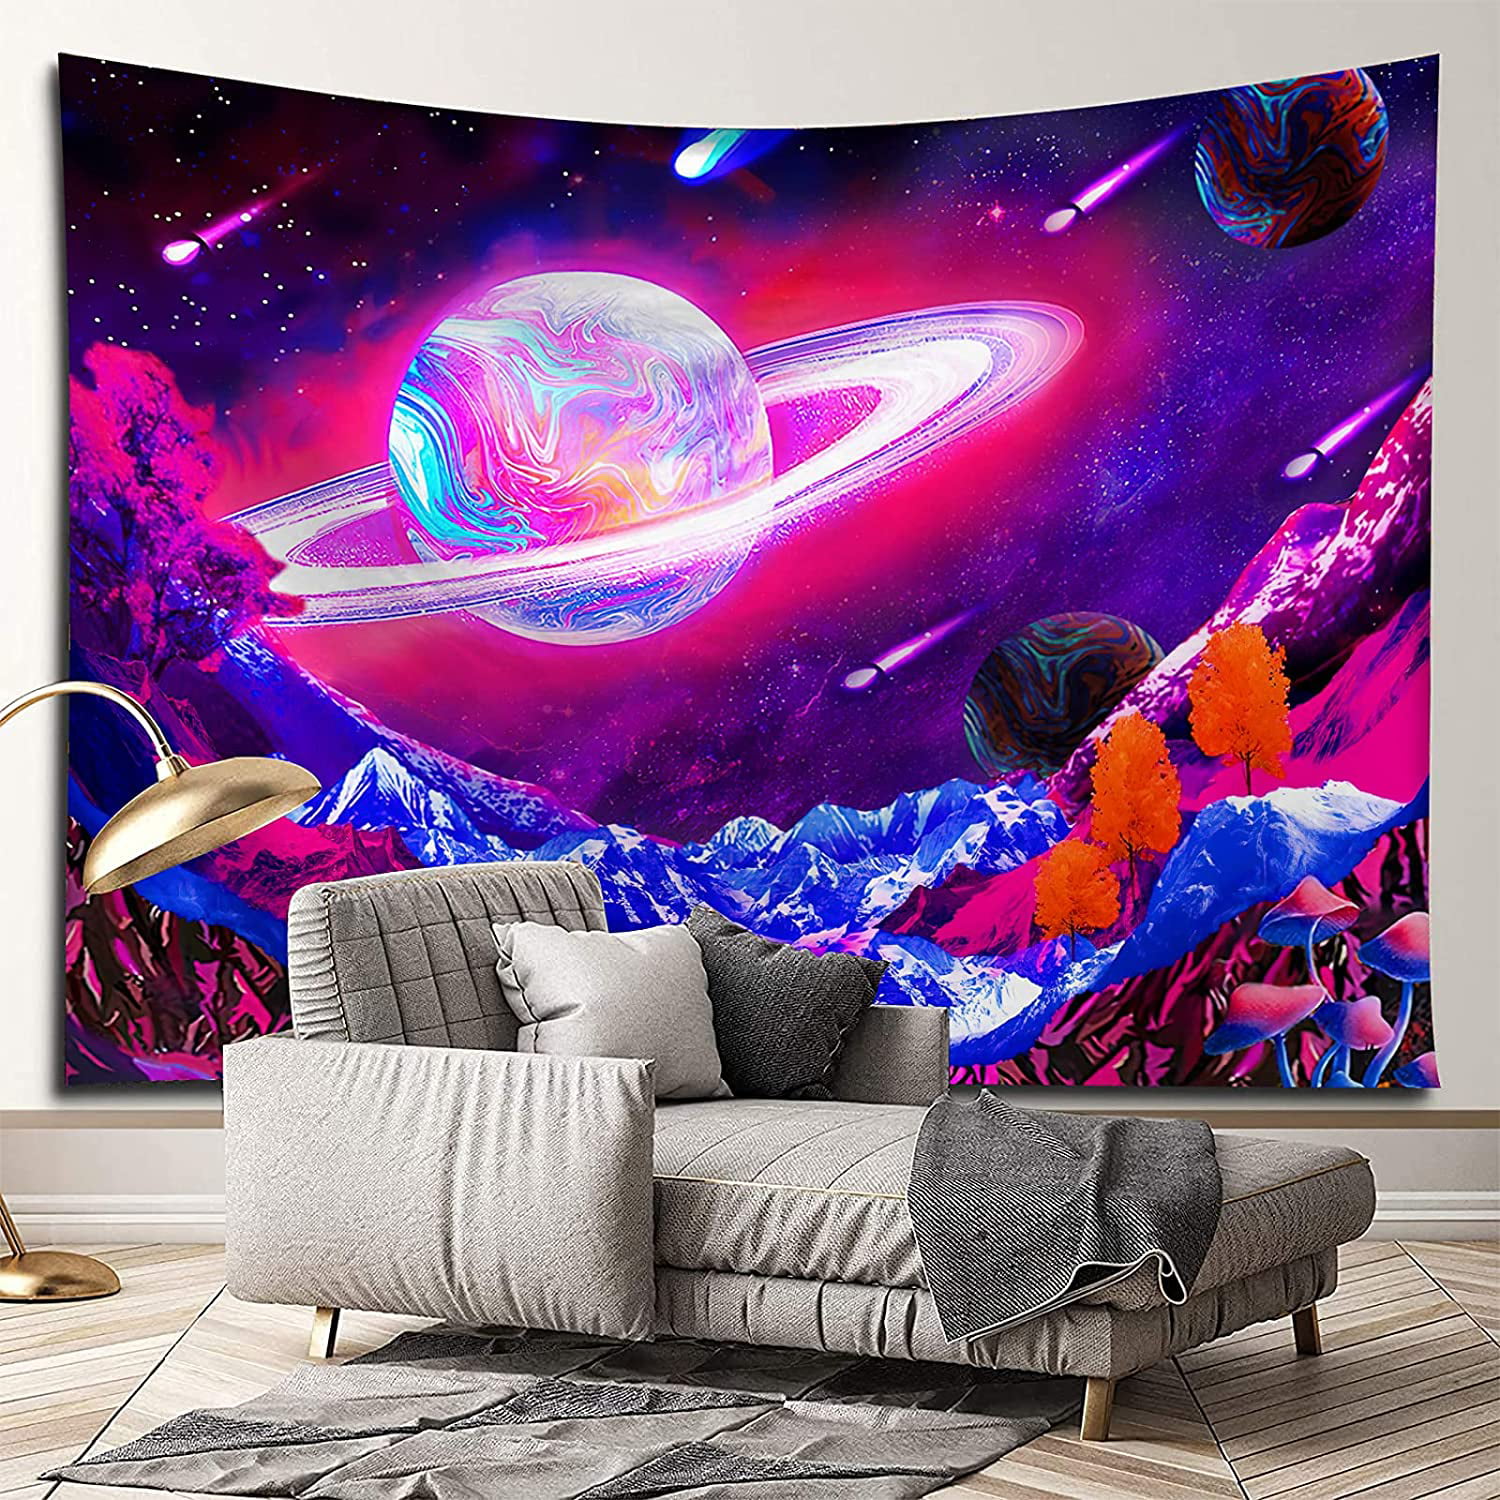 Galaxy Planet Tapestry Wall Hanging Psychedelic Space Tapestry Home Decor USA 